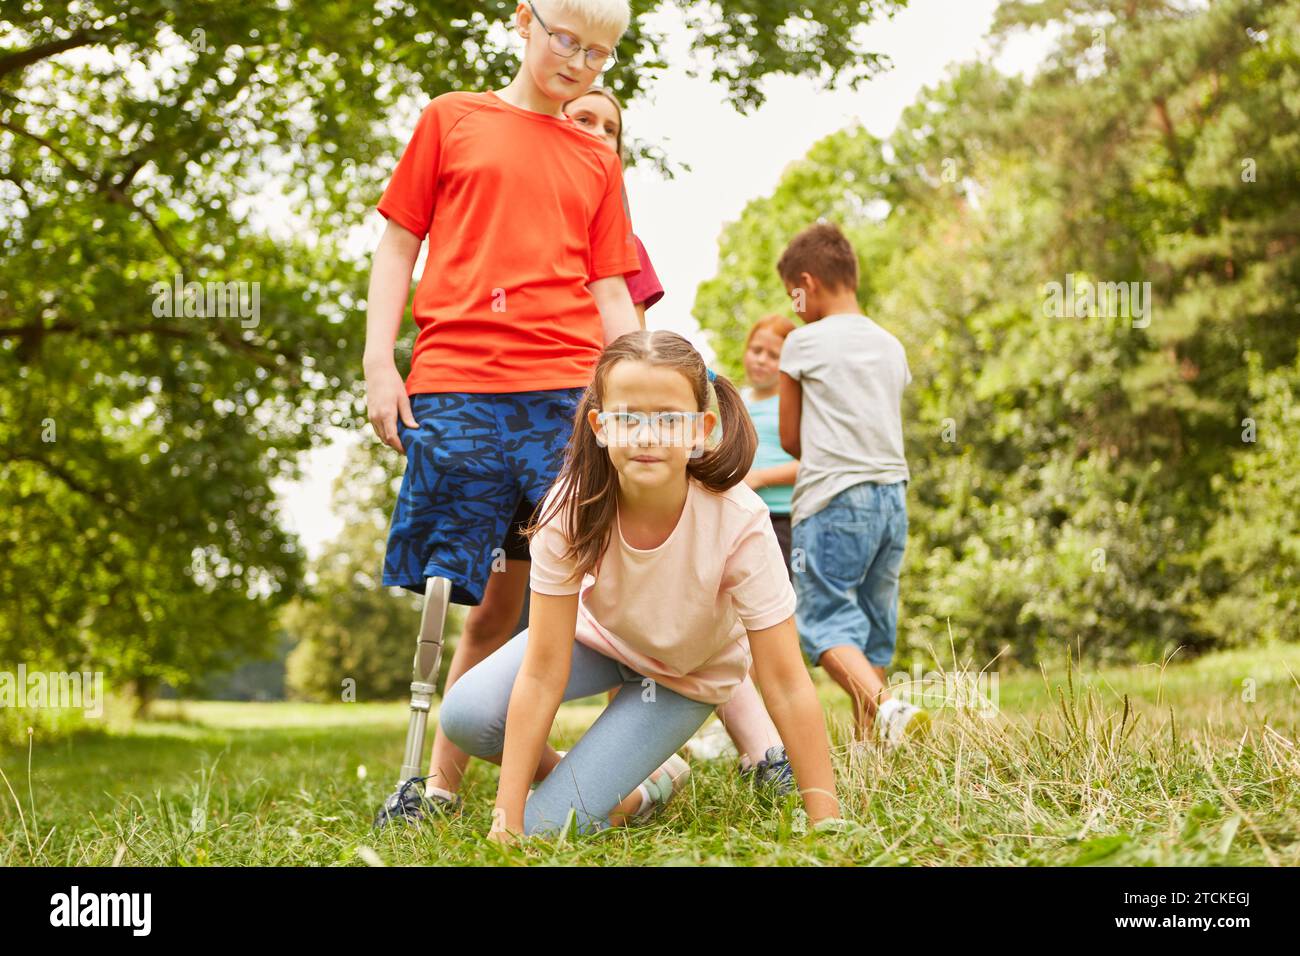 Portrait of girl wearing eyeglasses and playing with friends while kneeling at park Stock Photo